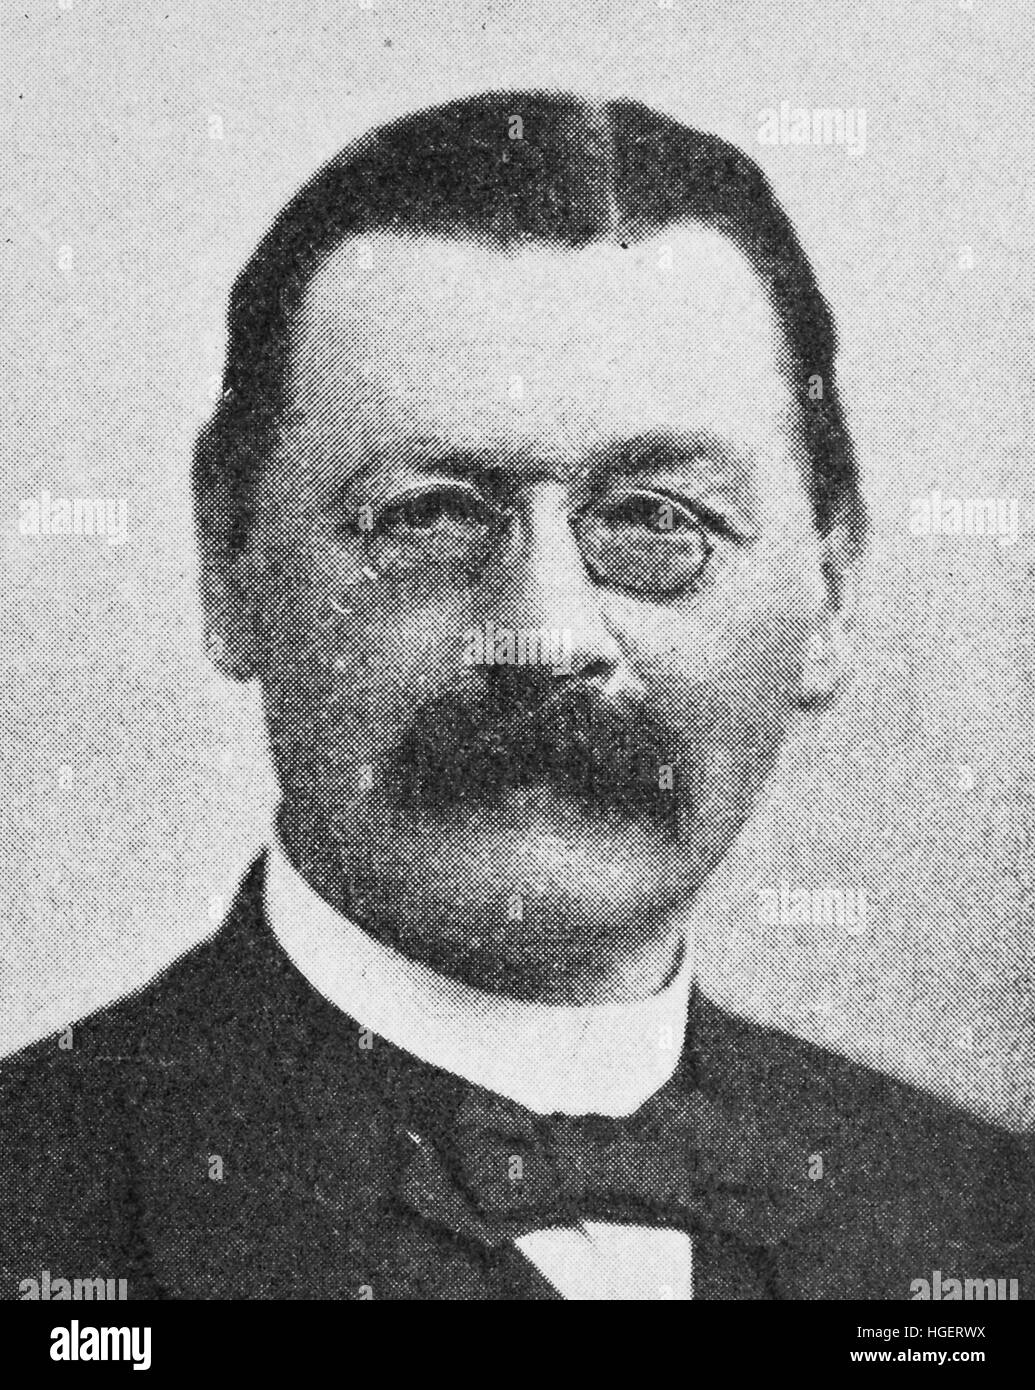 Ferdinand Zirkel, May 20, 1838 - June 11, 1912, was a German geologist and petrographer, reproduction of a photo from the year 1895, digital improved Stock Photo